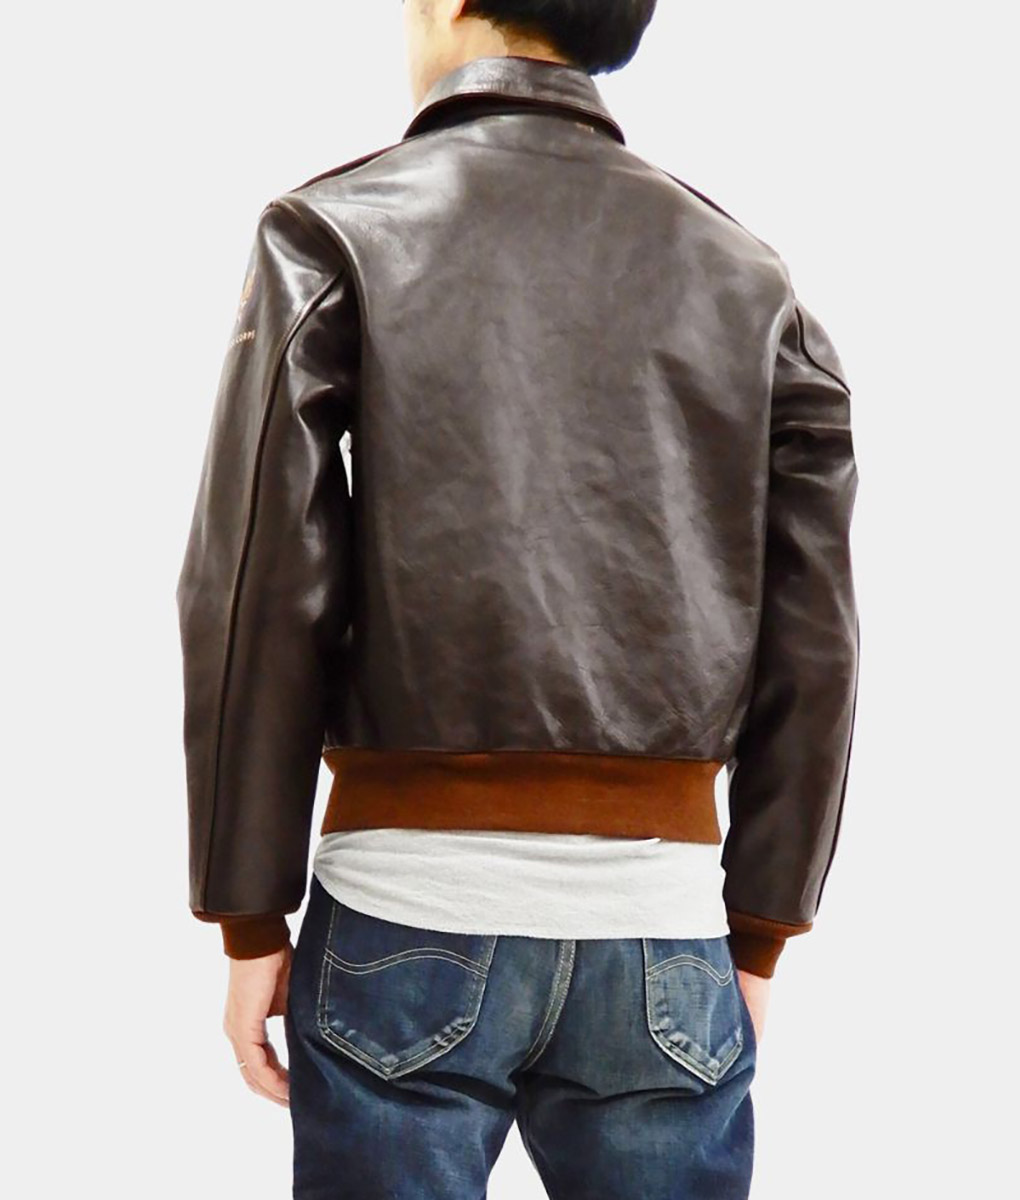 The Great Escape Hilts 'The Cooler King' (Steve McQueen) Jacket | TLC